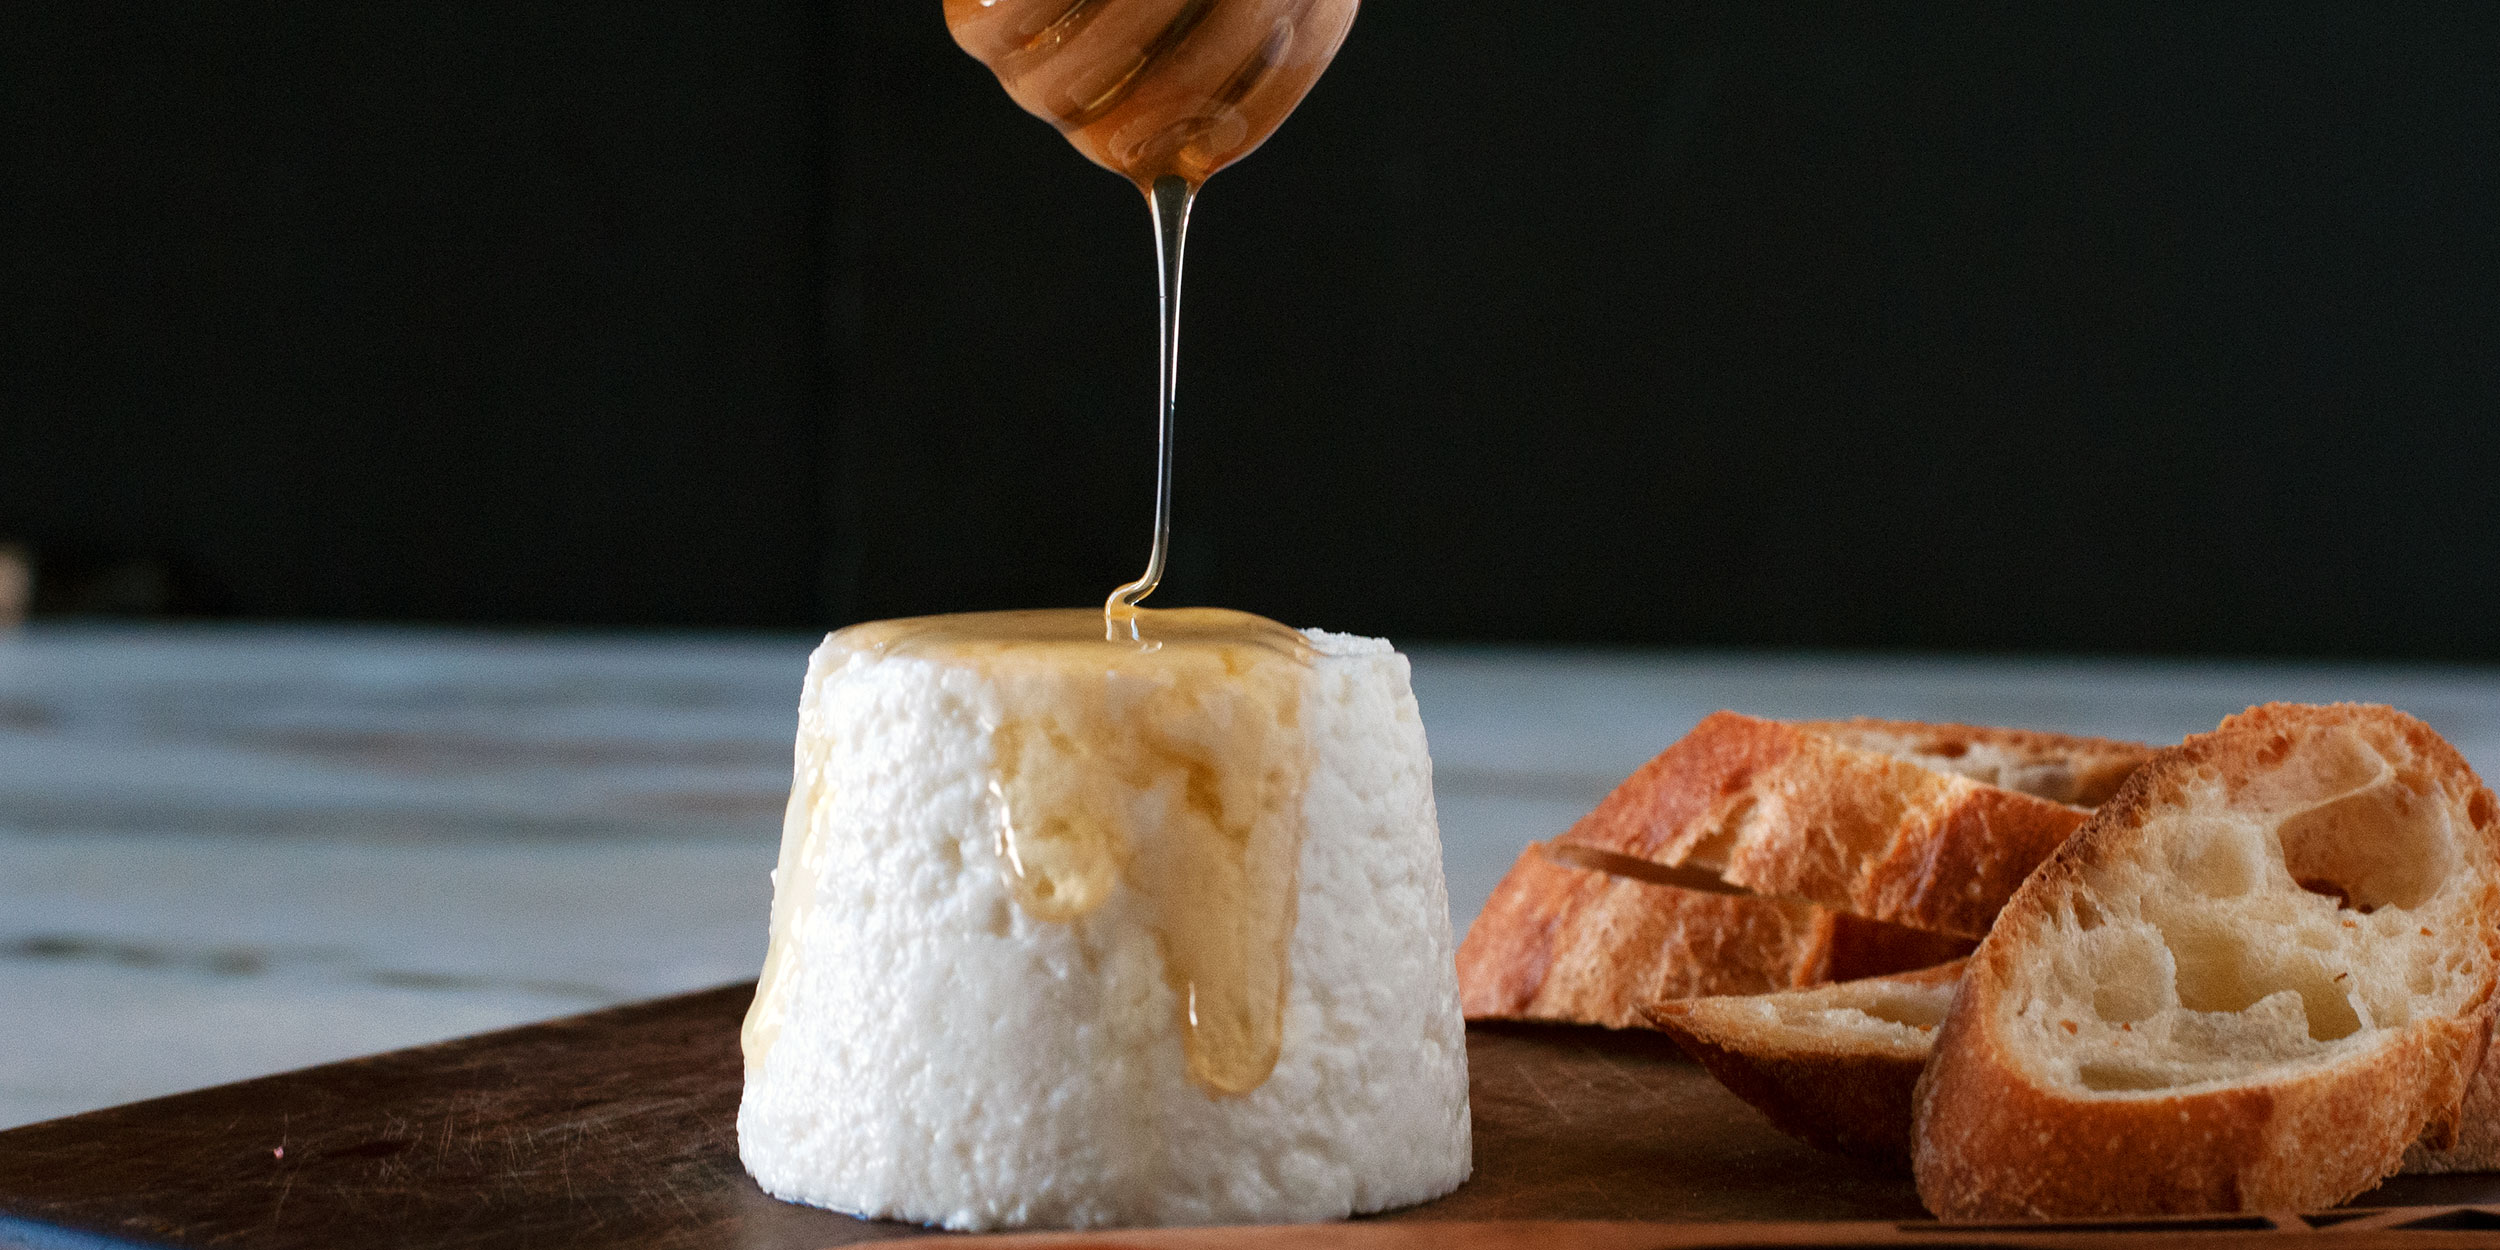 Kitchen Experiments: Make Goat Cheese at Home – Andrew Zimmern